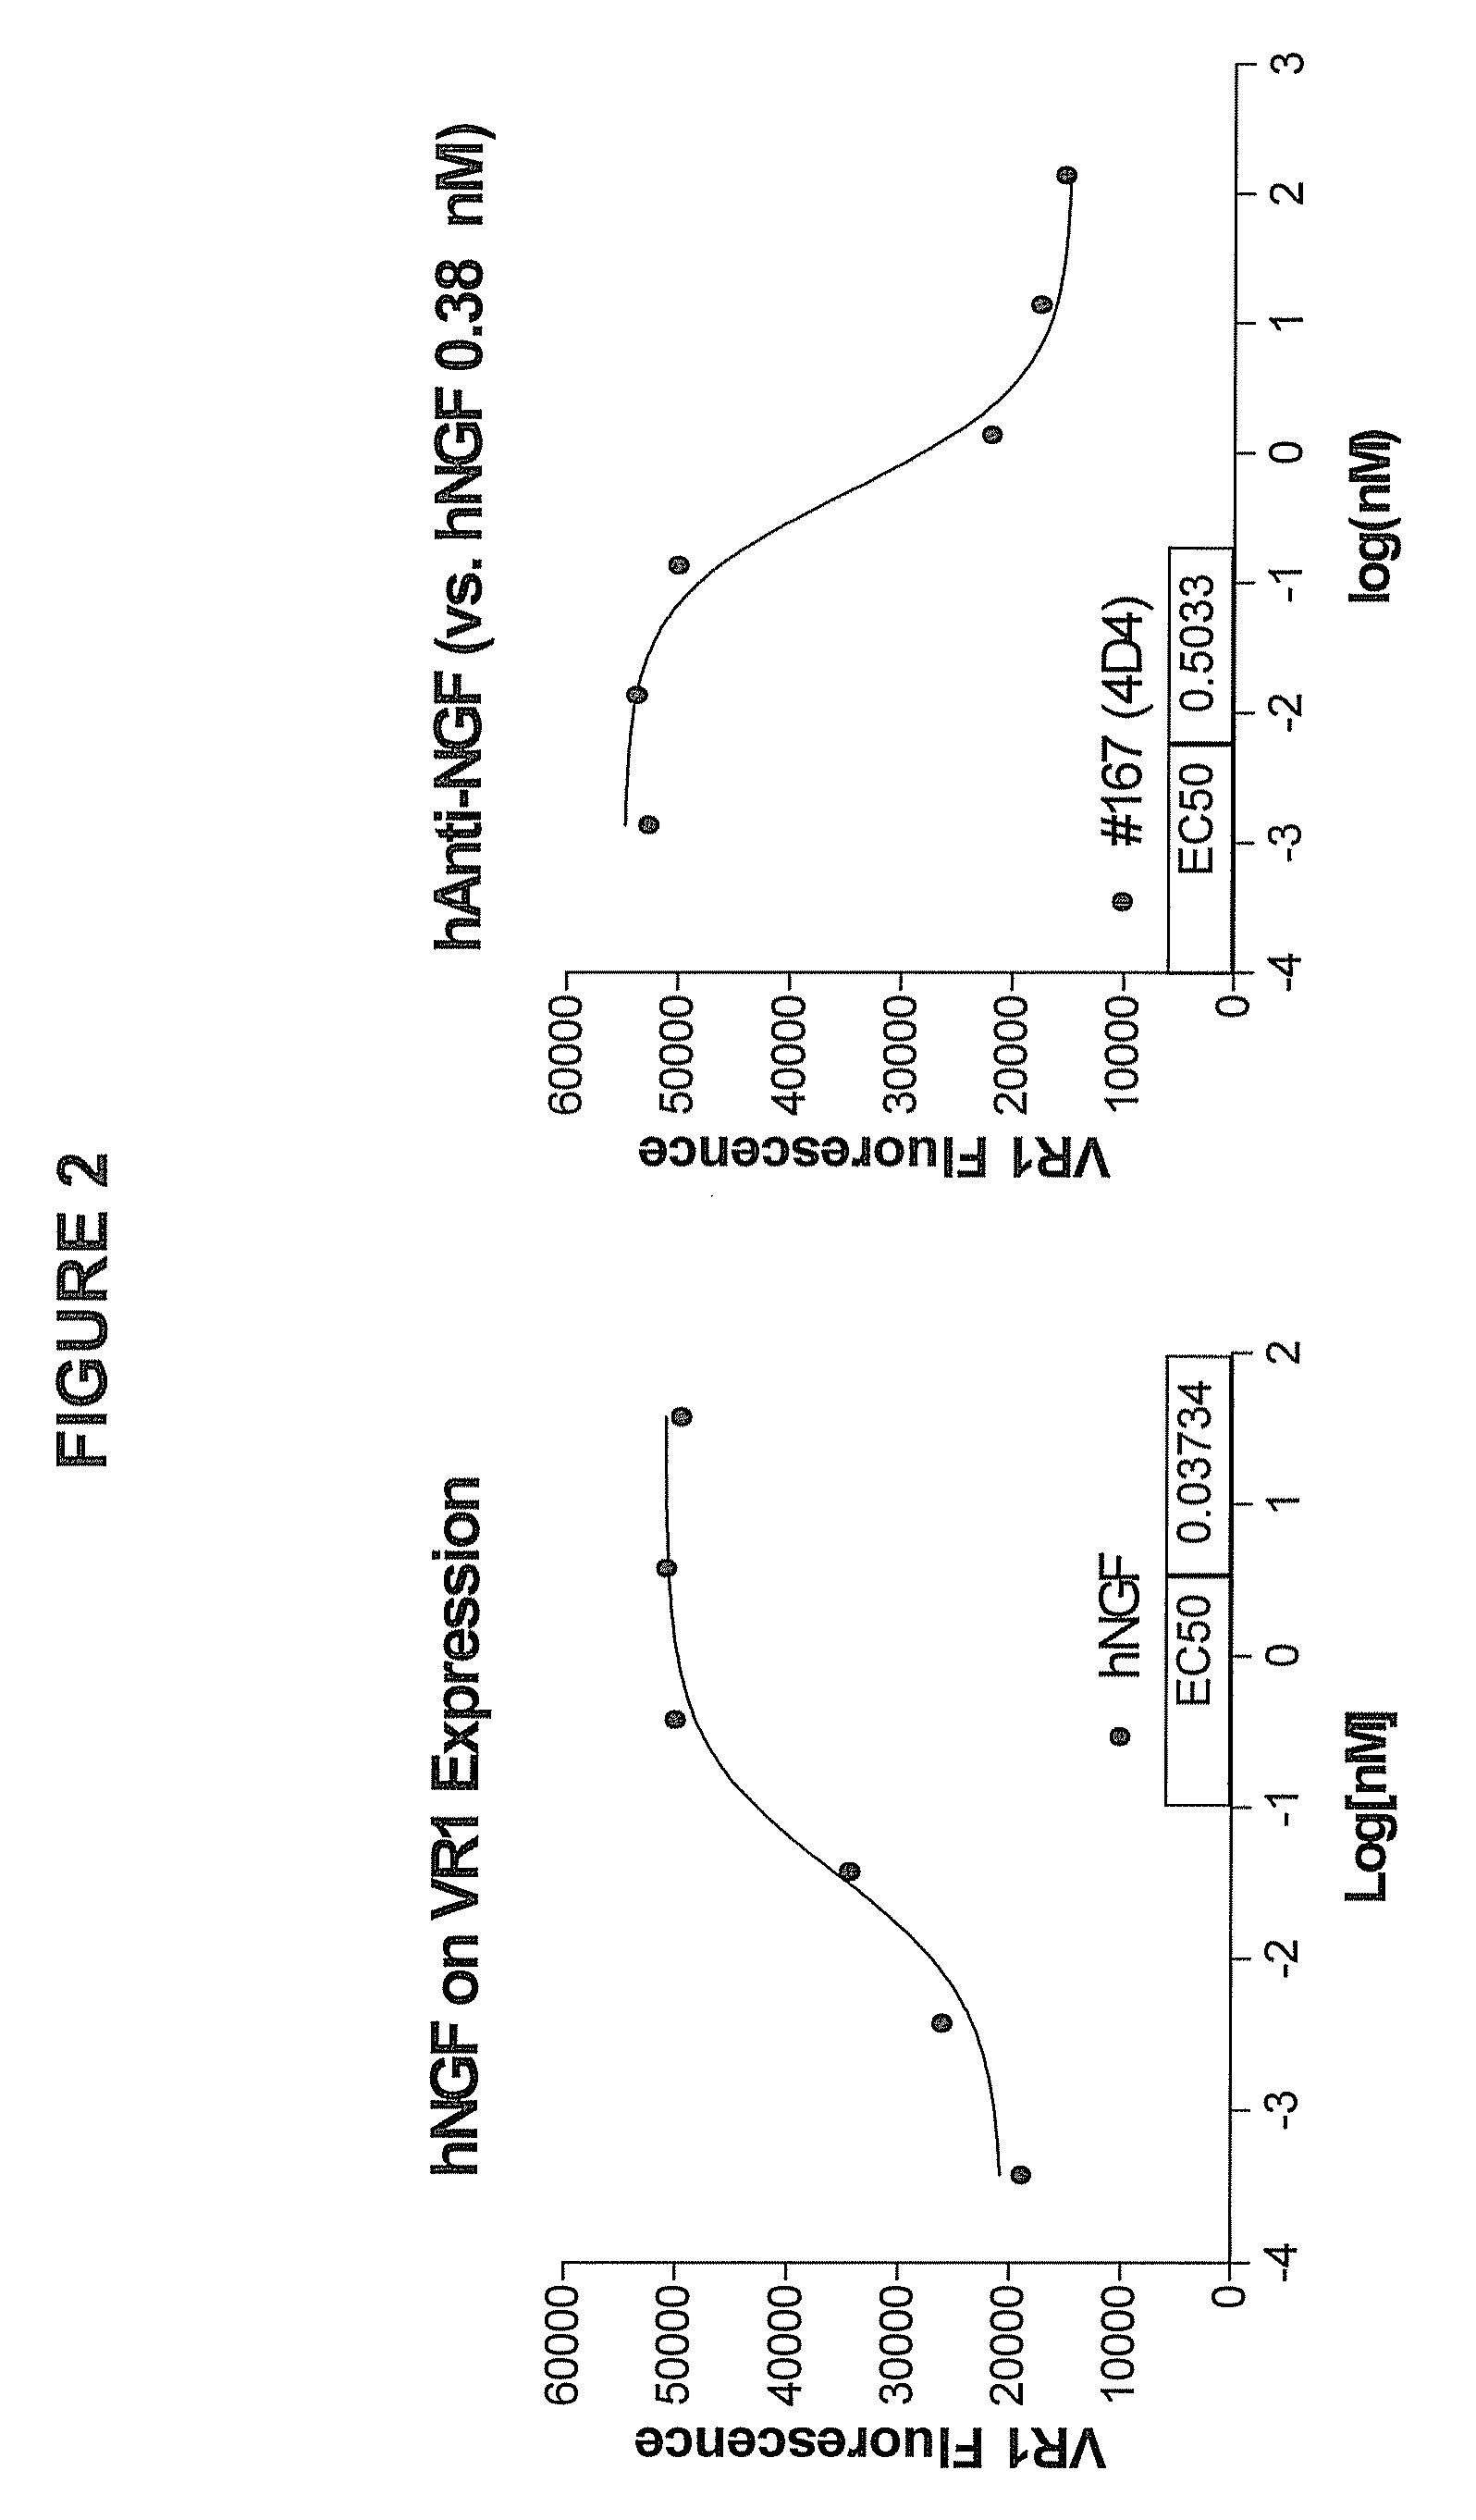 Methods of treating conditions caused by increased expression of nerve growth factor (NGF) or increased sensitivity to NGF using anti-NGF neutralizing antibodies as selective NGF pathway inhibitors